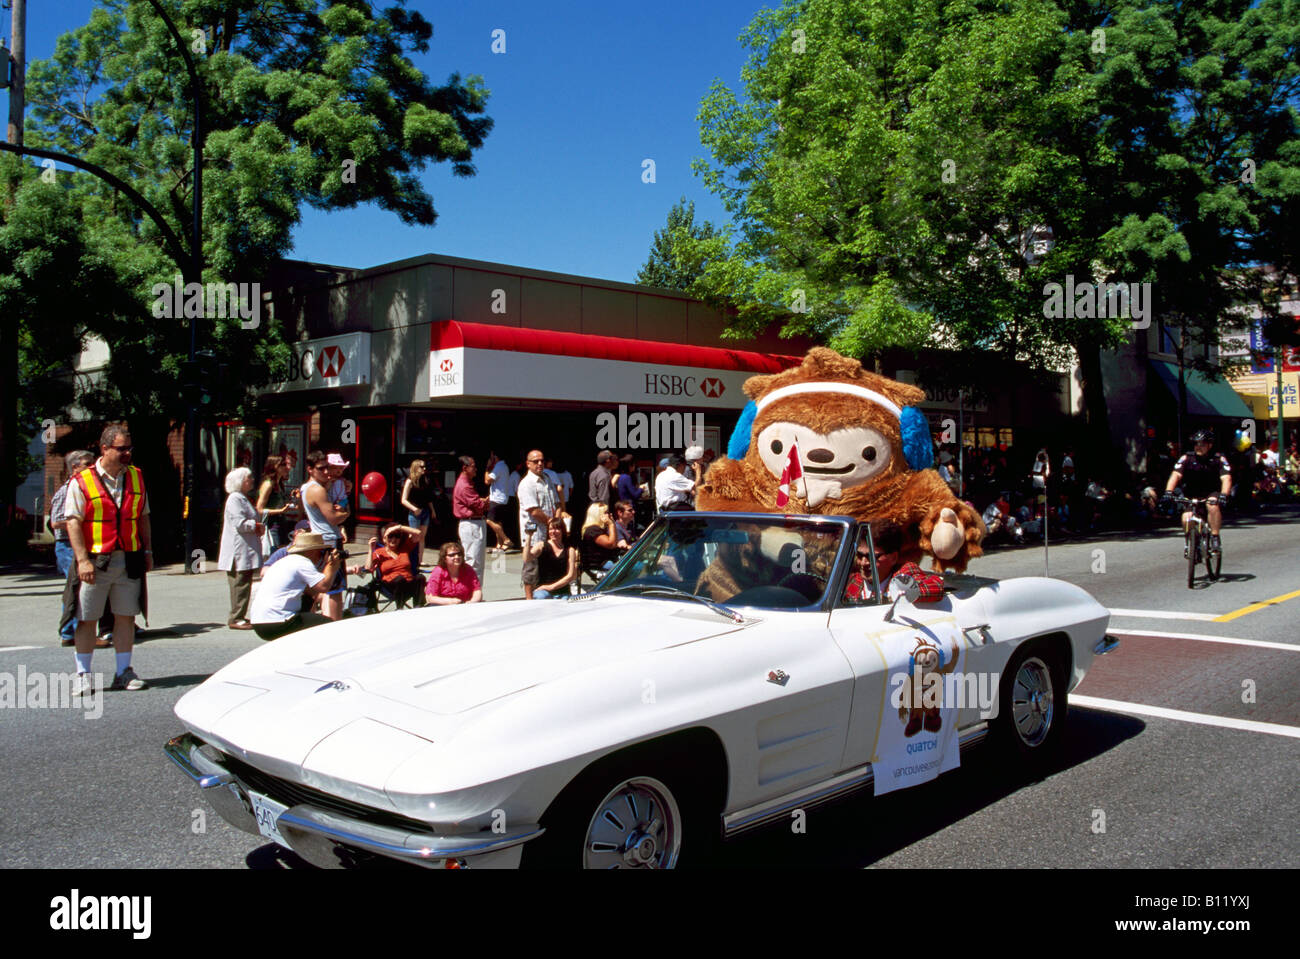 Quatchi - Mascot for 2010 Olympic and Paralympic Winter Games - in Hyack Parade, New Westminster, BC, British Columbia, Canada Stock Photo